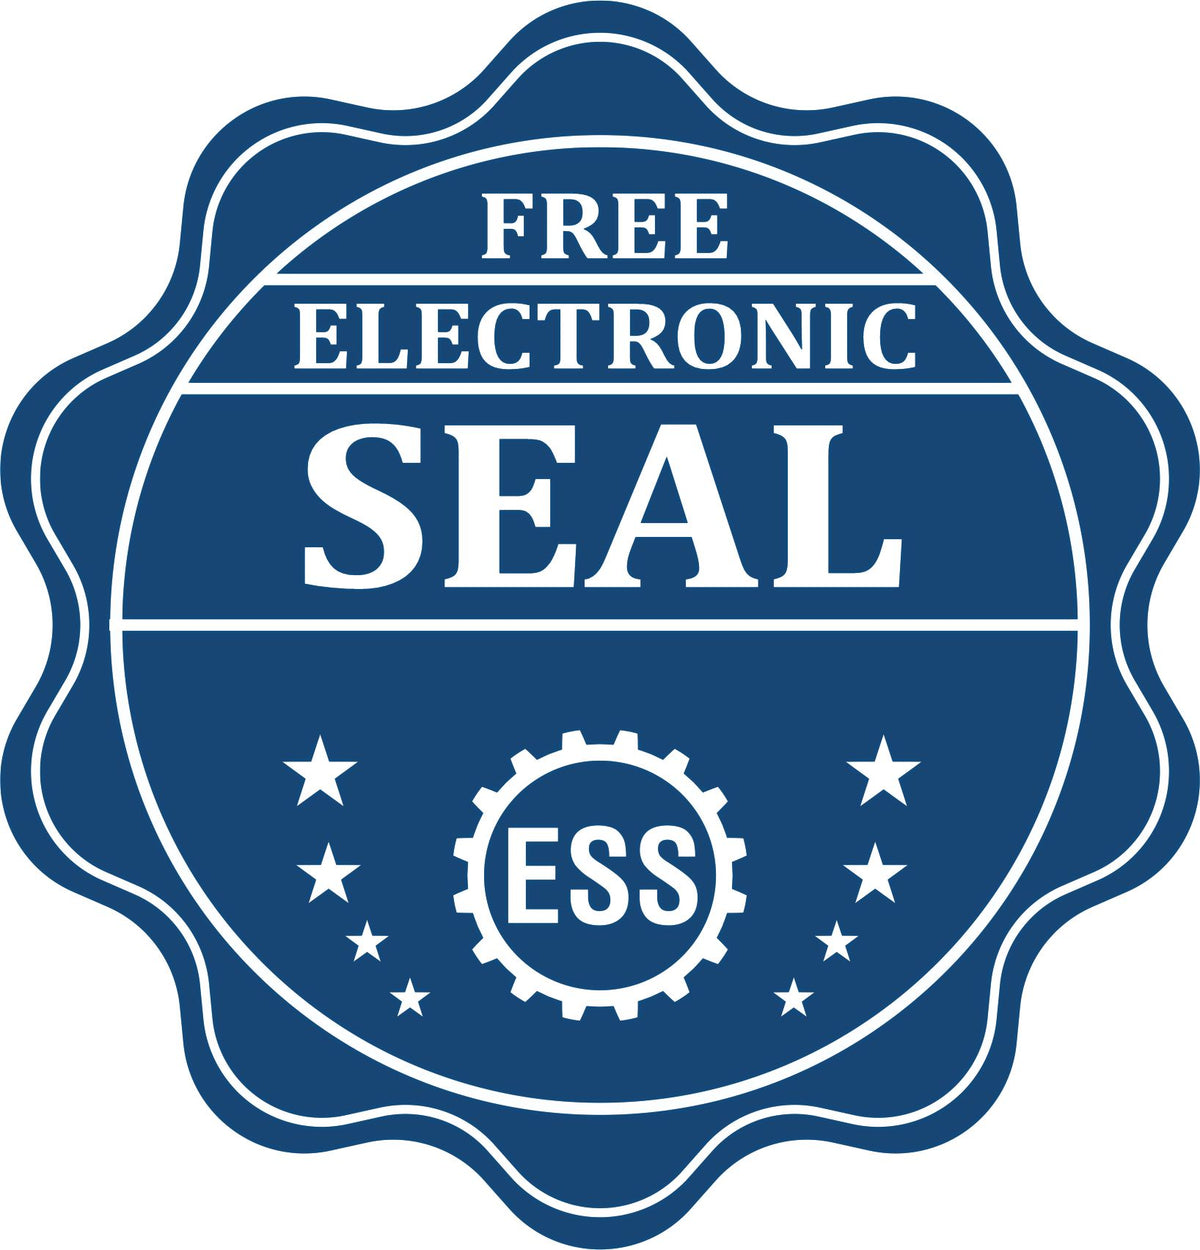 A badge showing a free electronic seal for the Slim Pre-Inked North Dakota Land Surveyor Seal Stamp with stars and the ESS gear on the emblem.